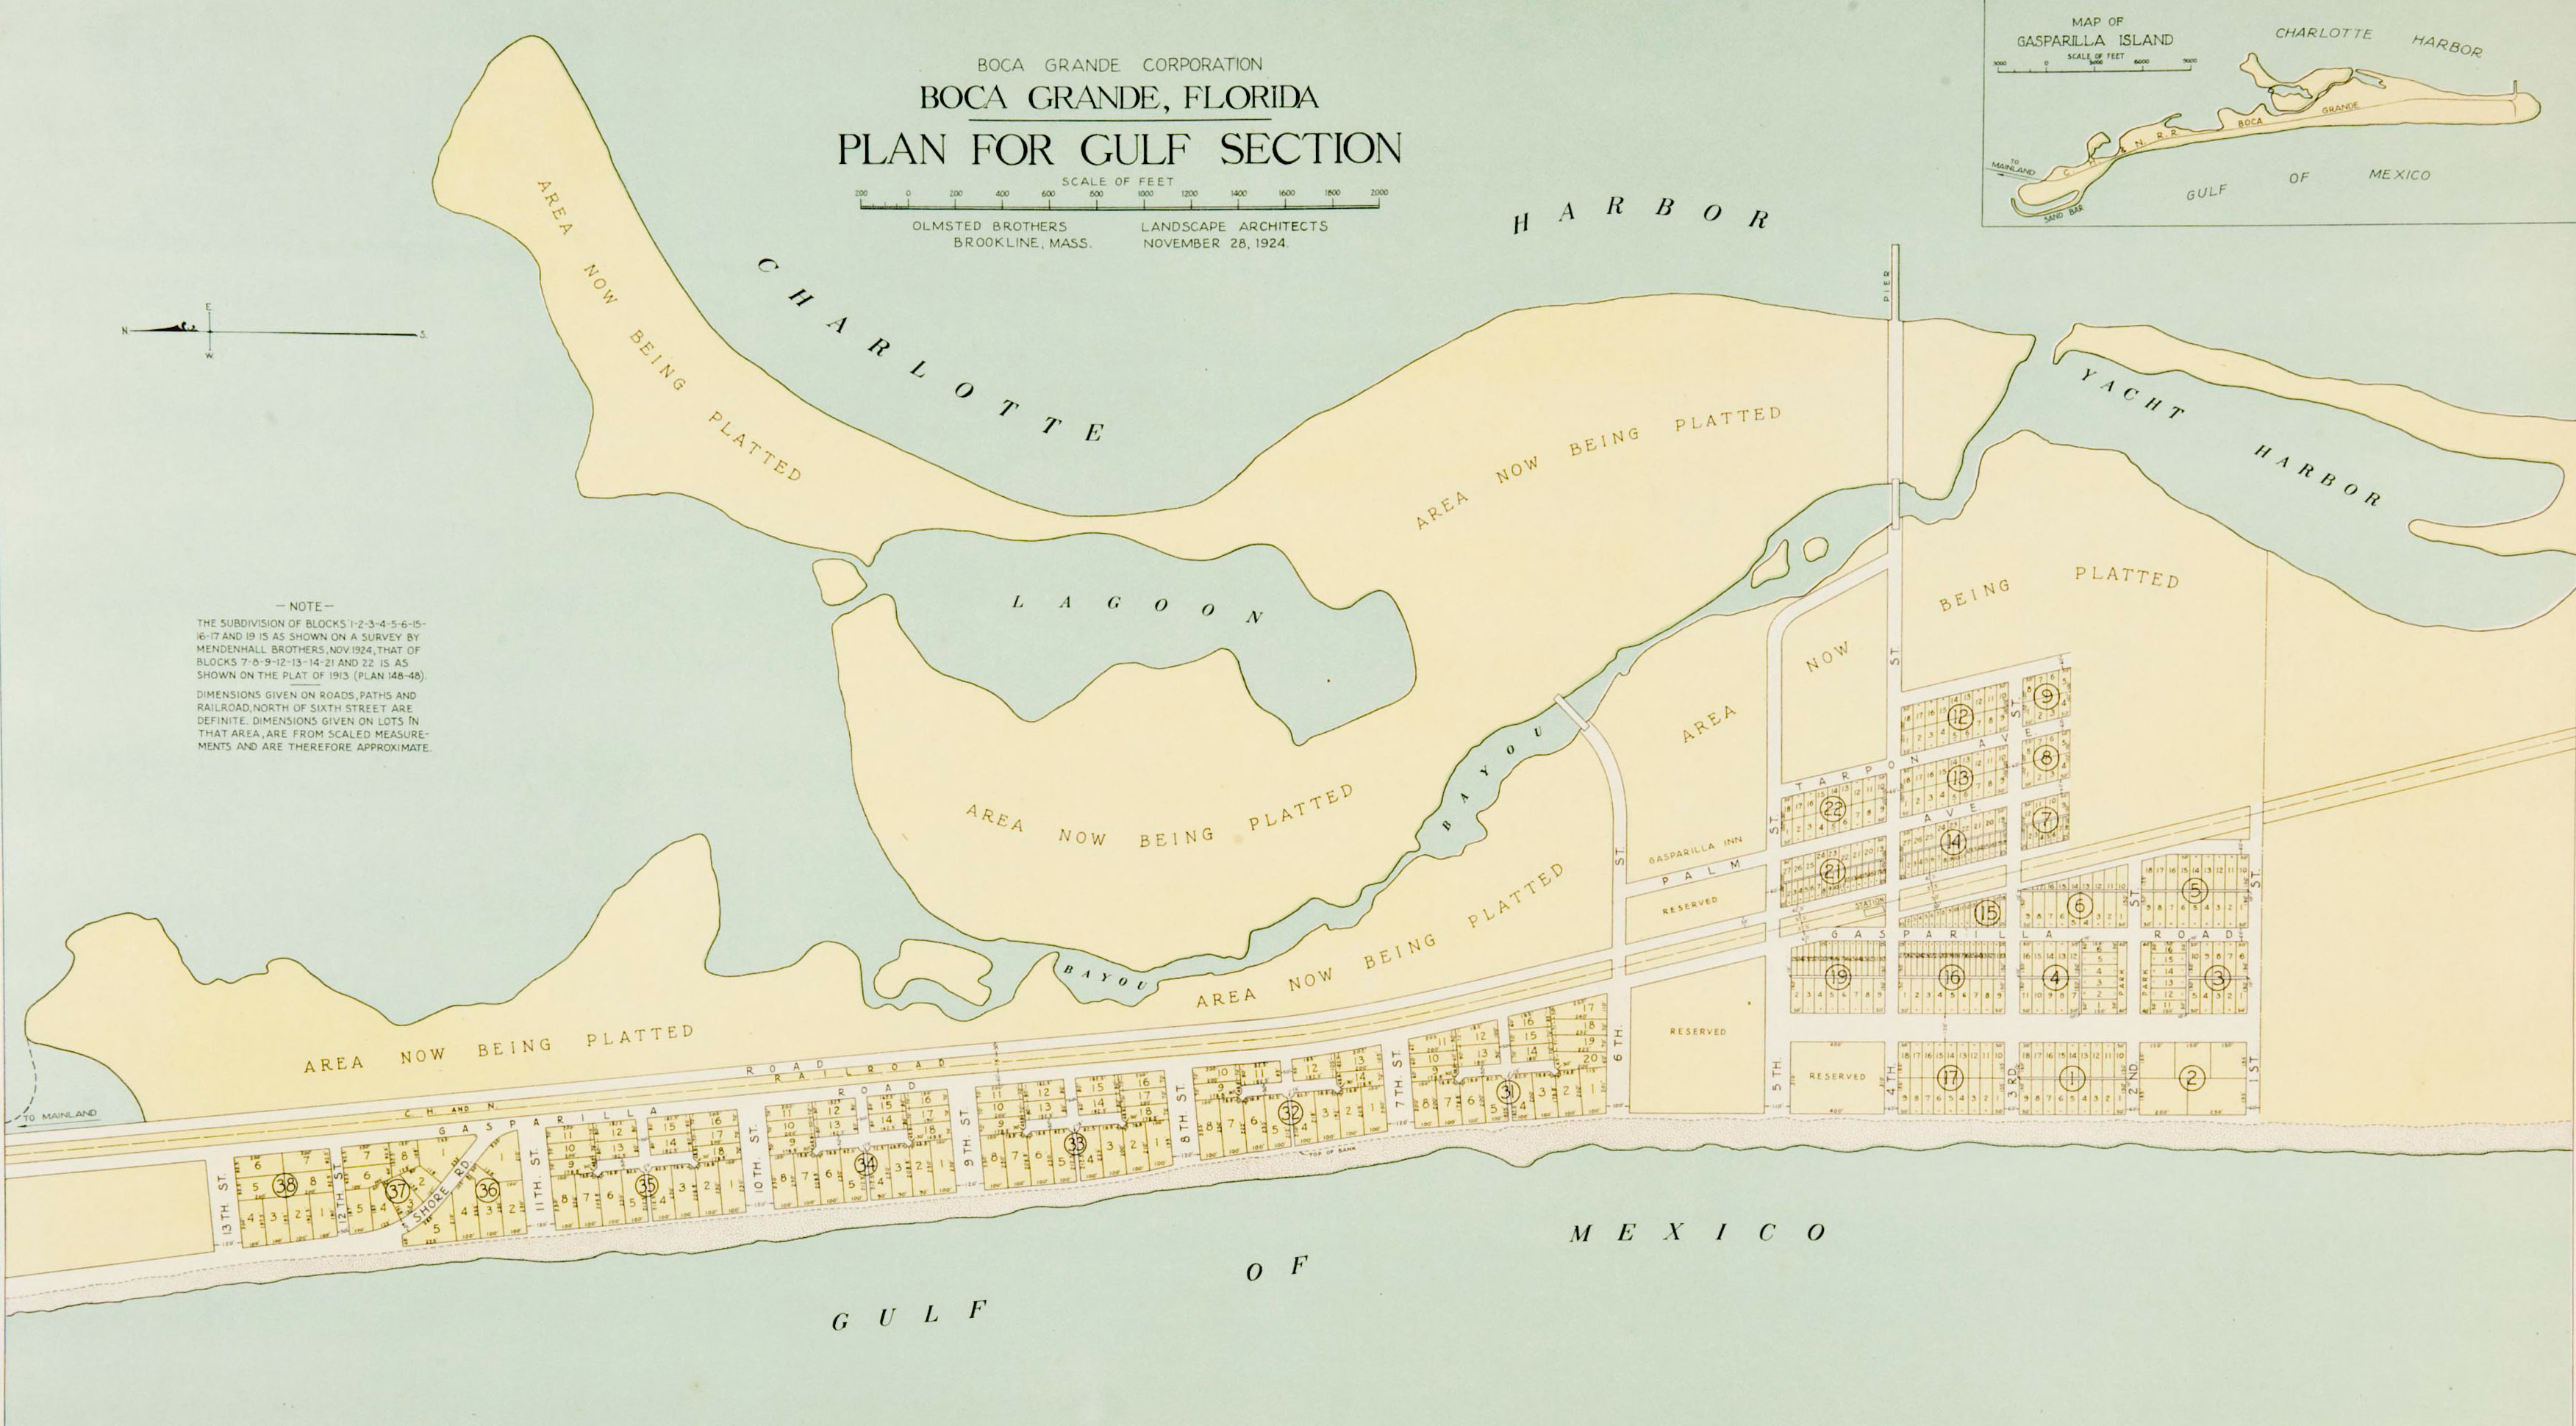 Plan for the Gulf Section of Boca Grande